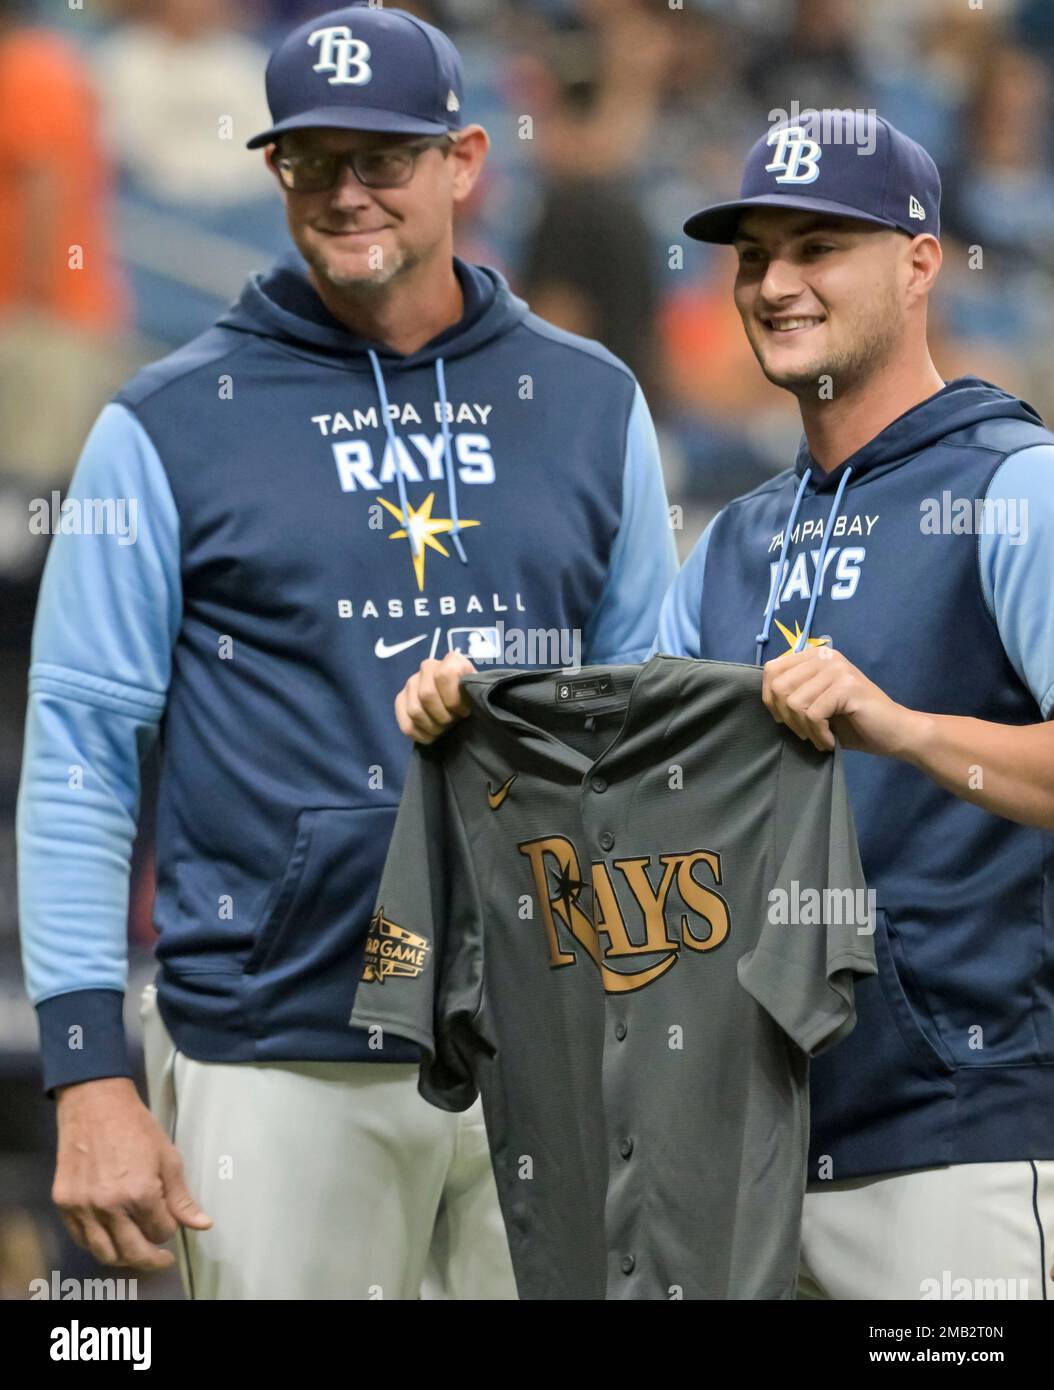 rays all star jersey